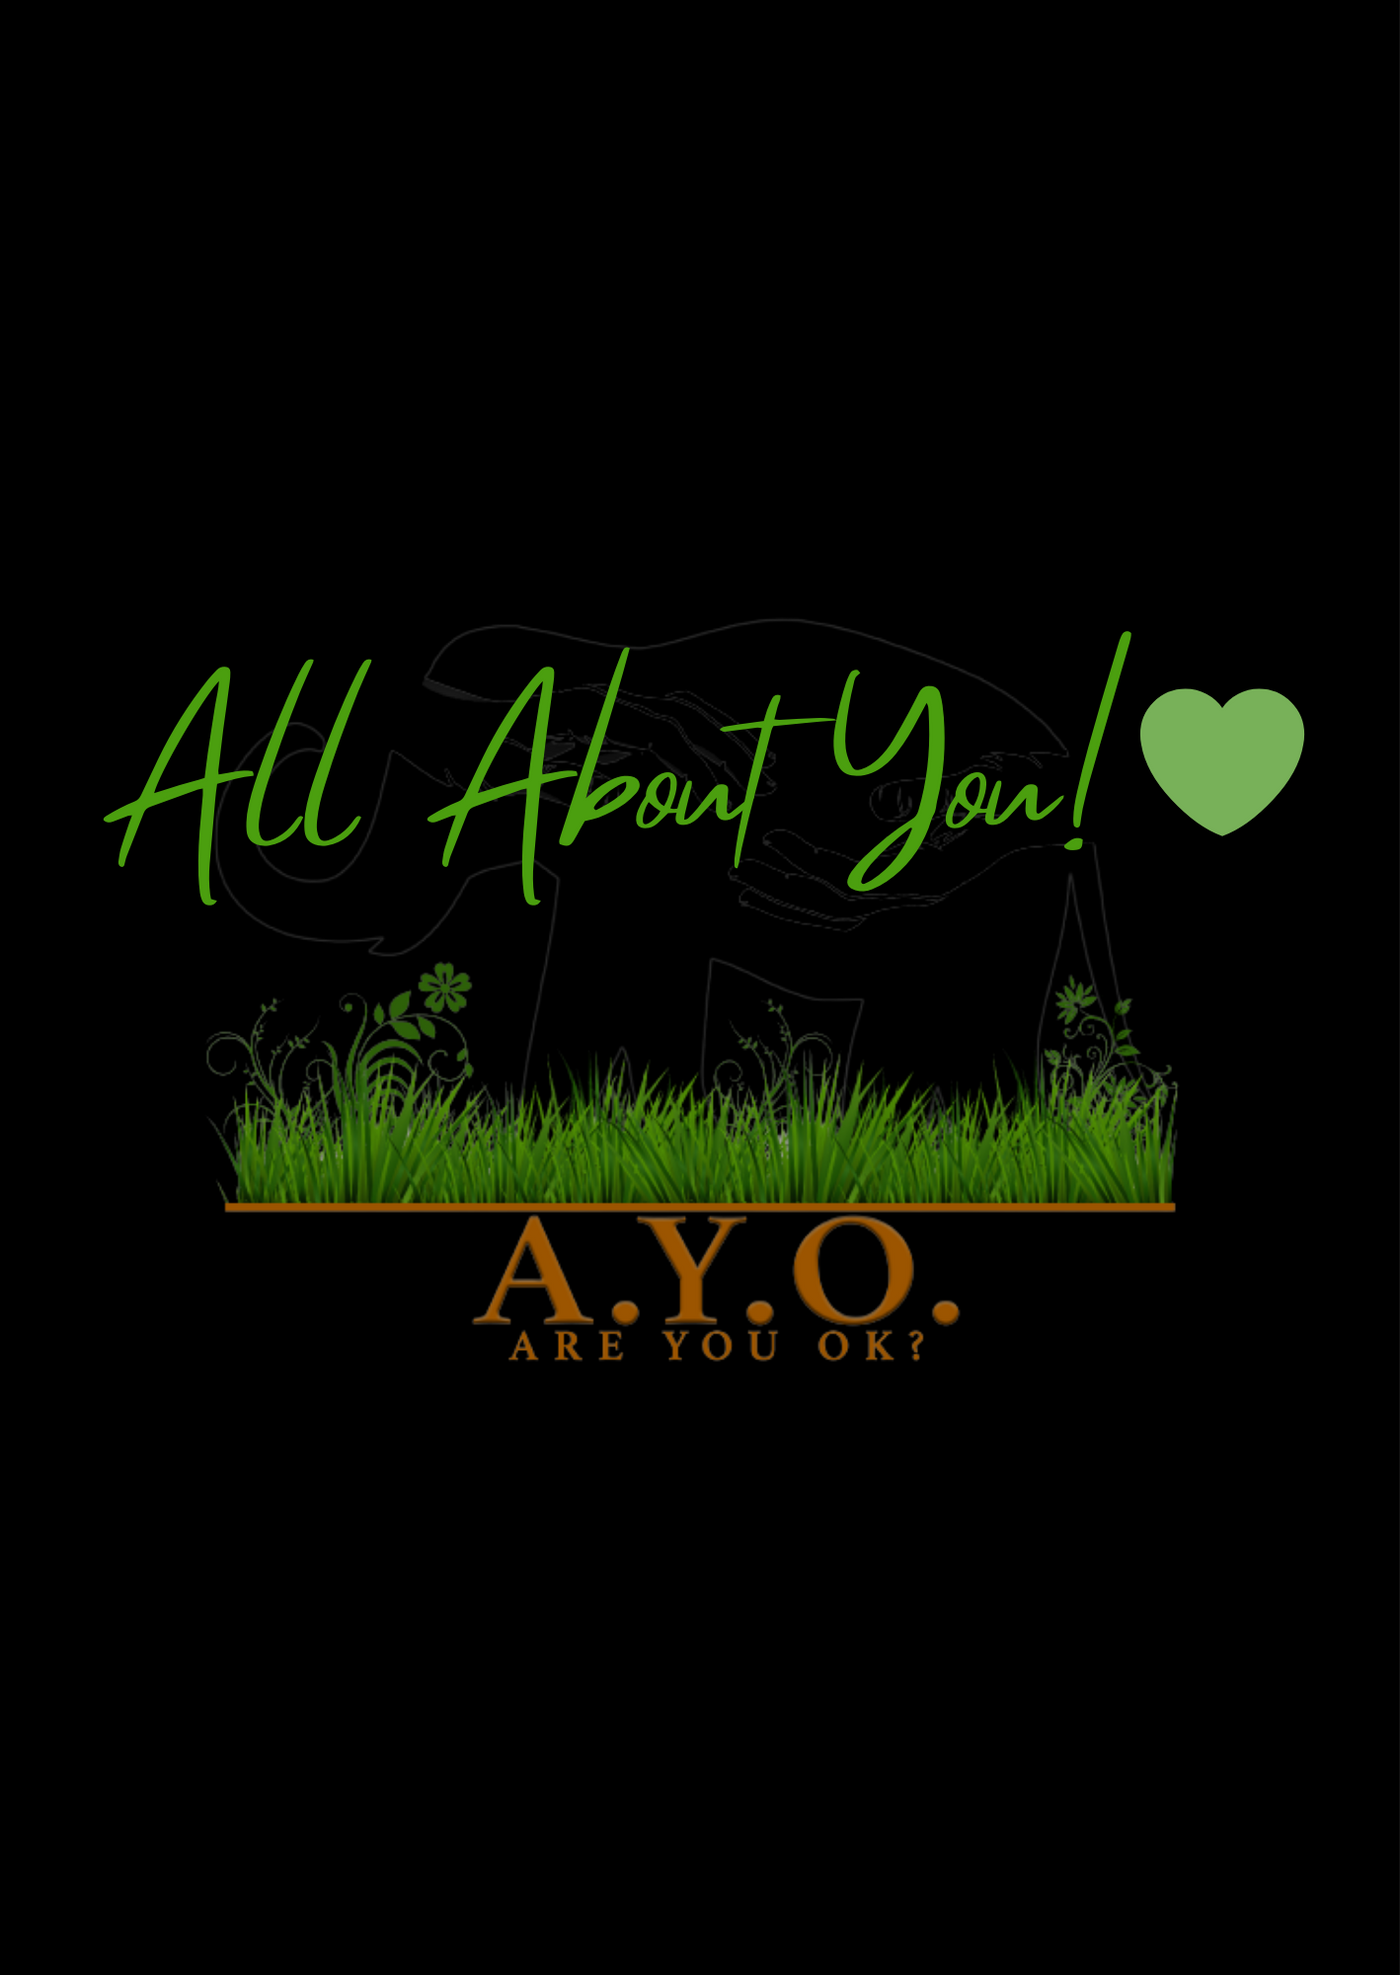 All About You! 💚